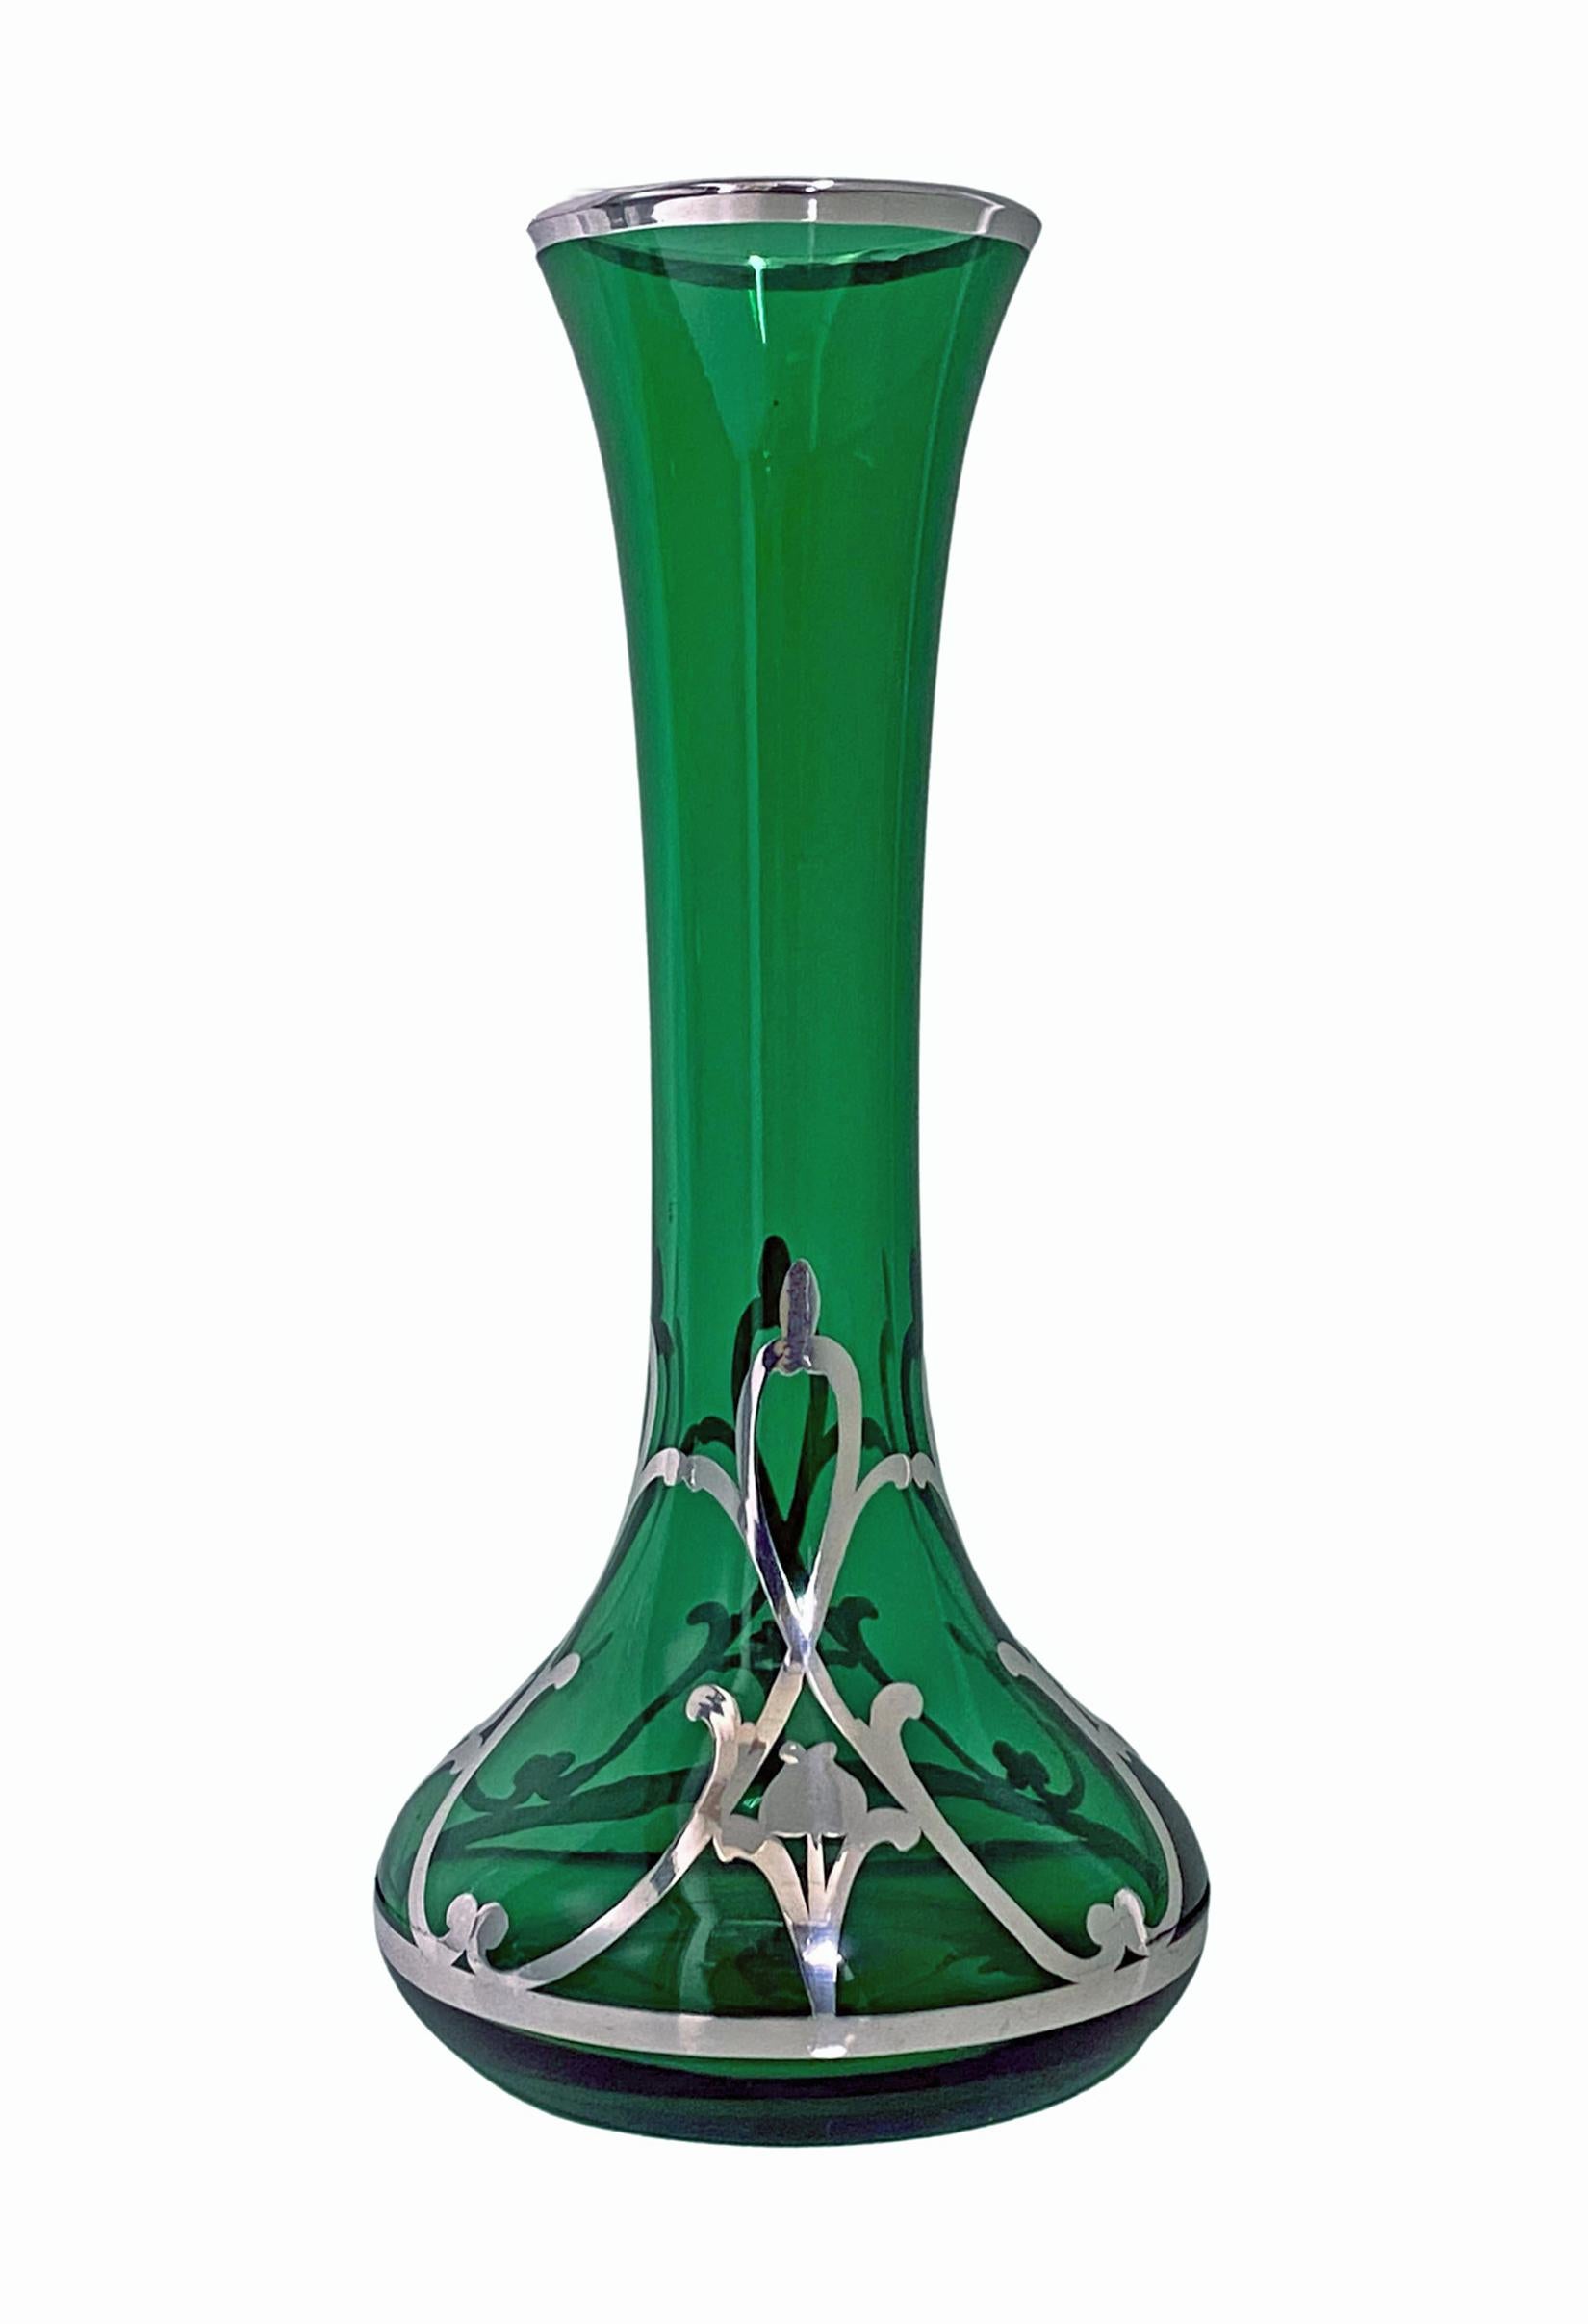 Art Nouveau Sterling overlay green Vase, American C.1910. Tapered bulbous form, the lower section with art nouveau sterling overlay decorative surround, the green glass slightly tapering to everted sterling mounted rim. Signed Sterling. Height:7.5